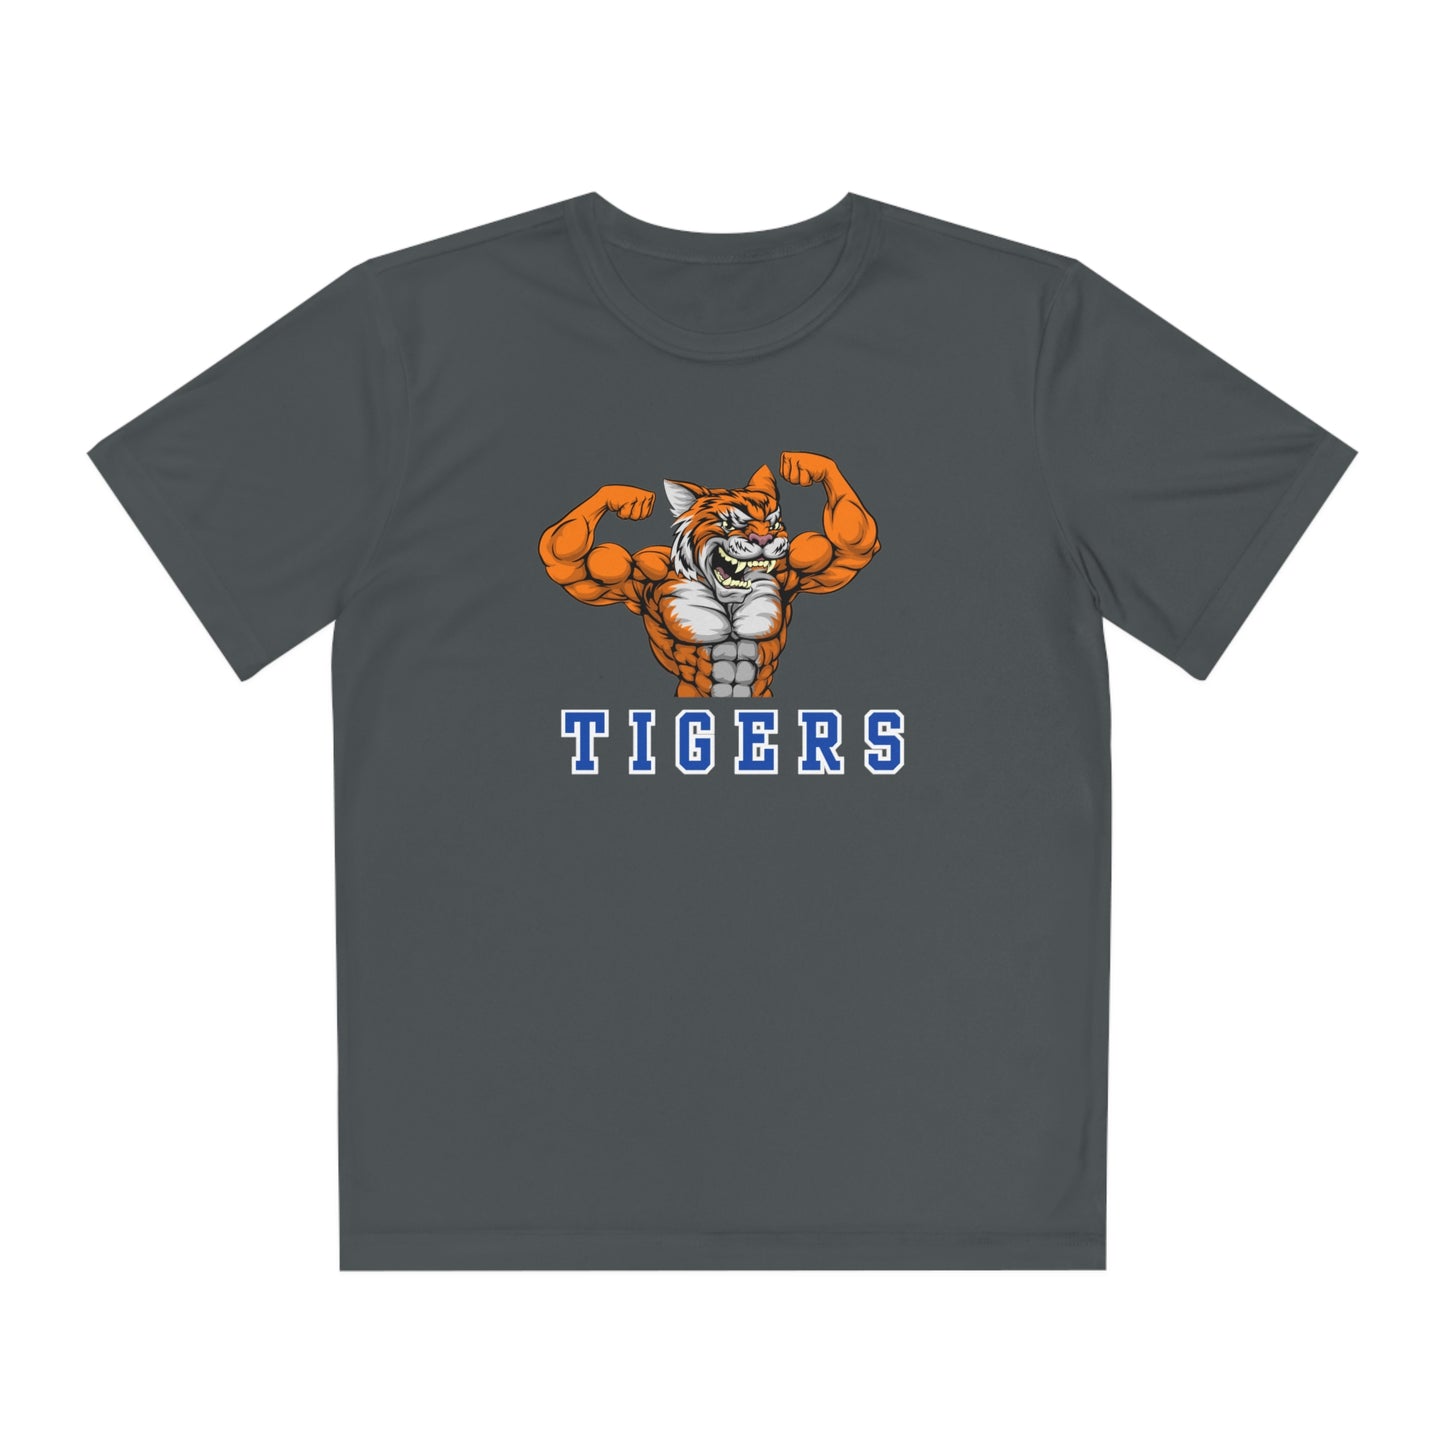 Wrightstown Built Strong Tiger - Youth